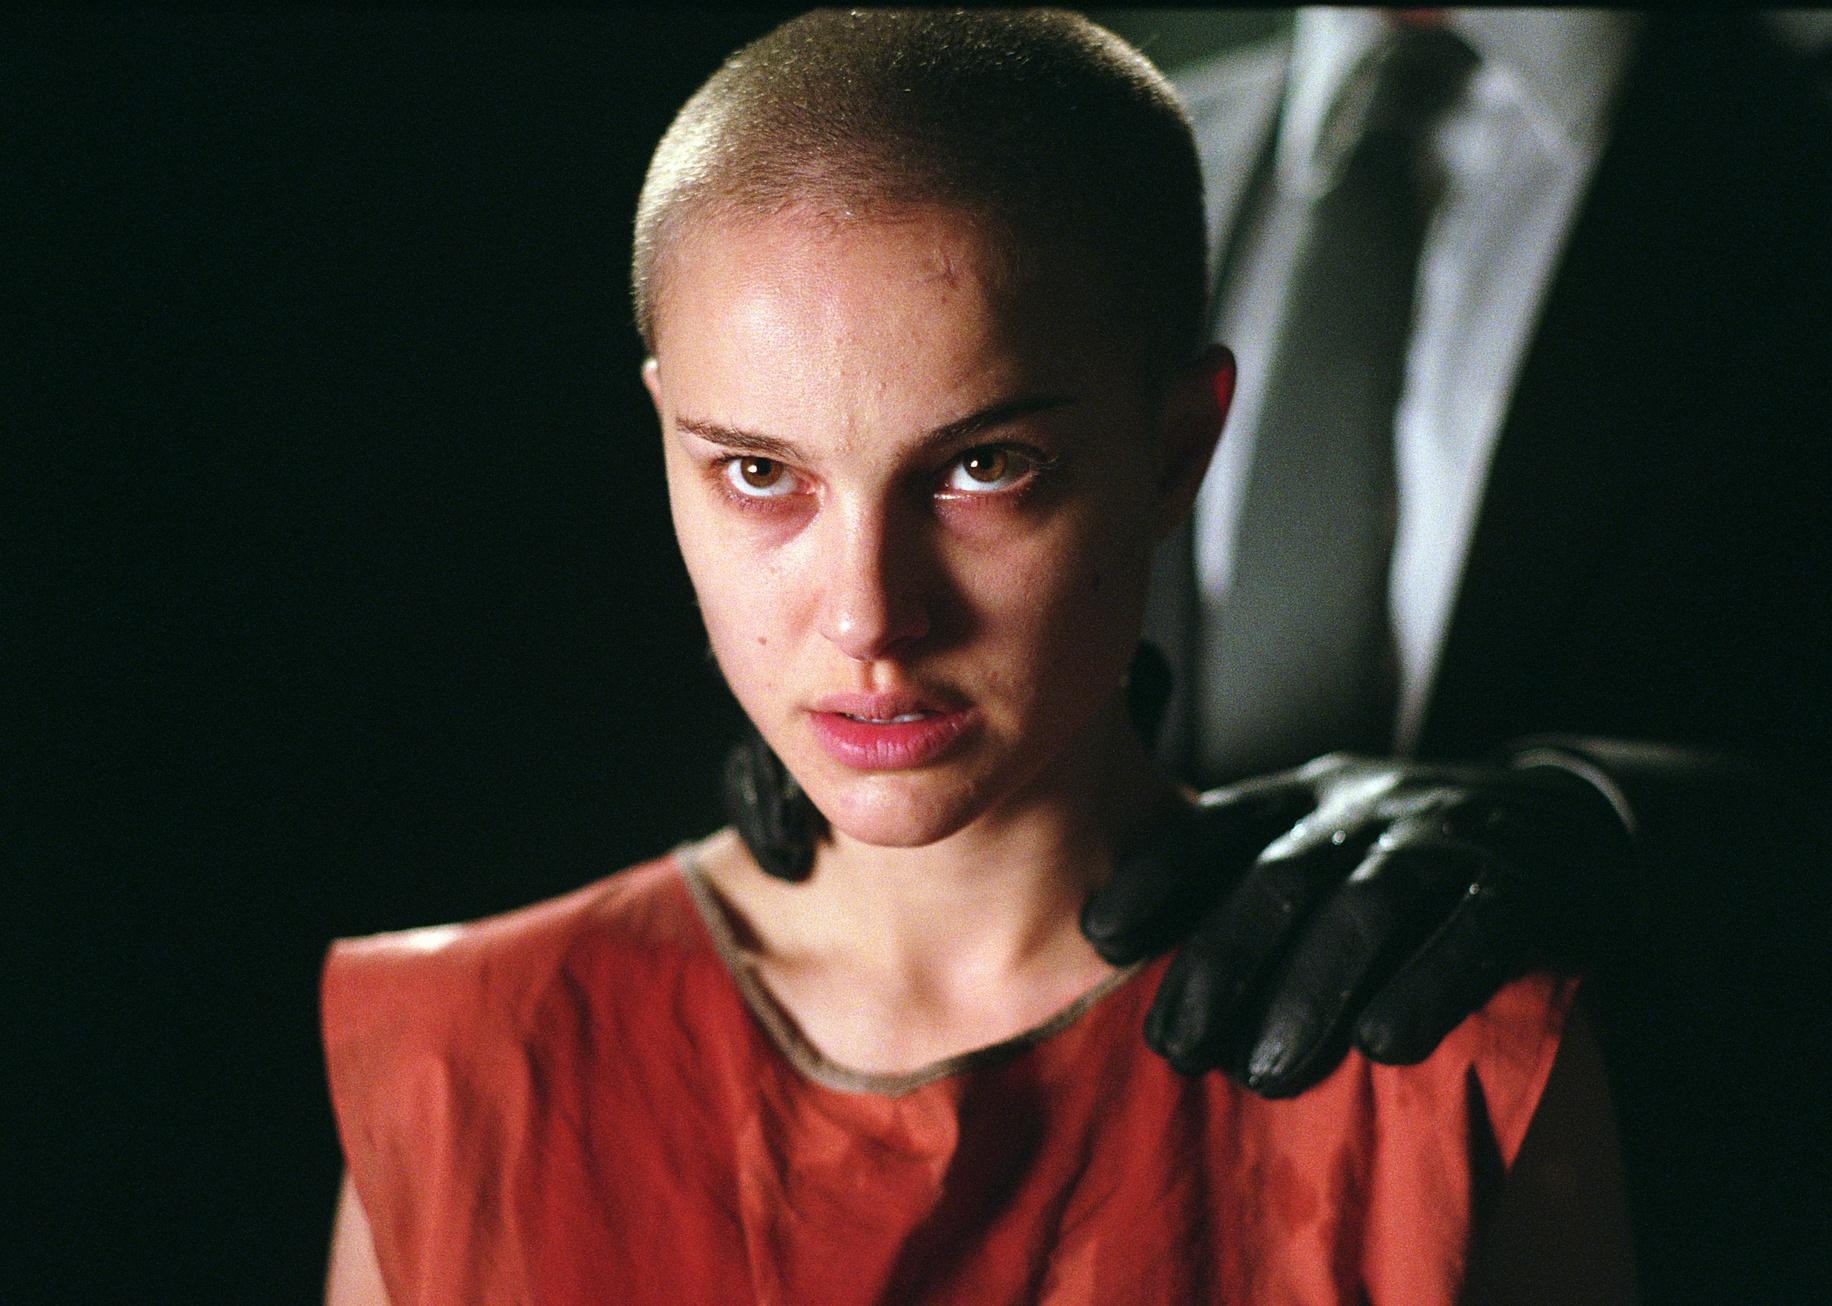 Natalie Portman with a shaved head.